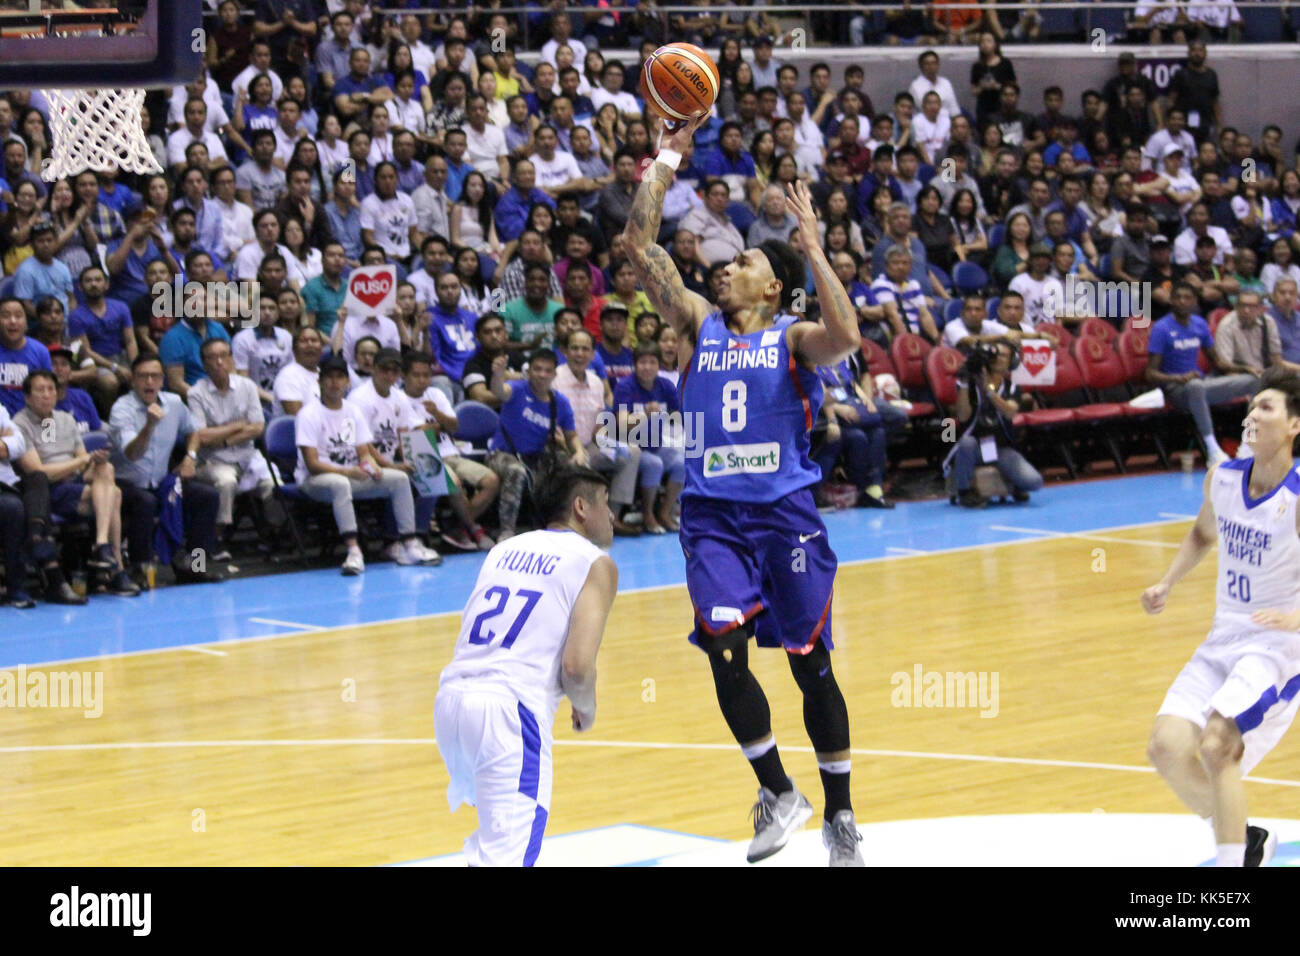 Quezon City, Philippines. 27th Nov, 2017. Calvin Abueva (8) of the Philippines soars over Jhen Huang (27) from Chinese Taipei to convert an uncontested lay-up during their FIBA World Cup Qualifying Match. Gilas Pilipinas defeated the visiting Chinese Taipei team 90-83 to complete a sweep of their first two assignments in the FIBA 2019 World Cup qualifiers. Credit: Dennis Jerome Acosta/ Pacific Press/Alamy Live News Stock Photo